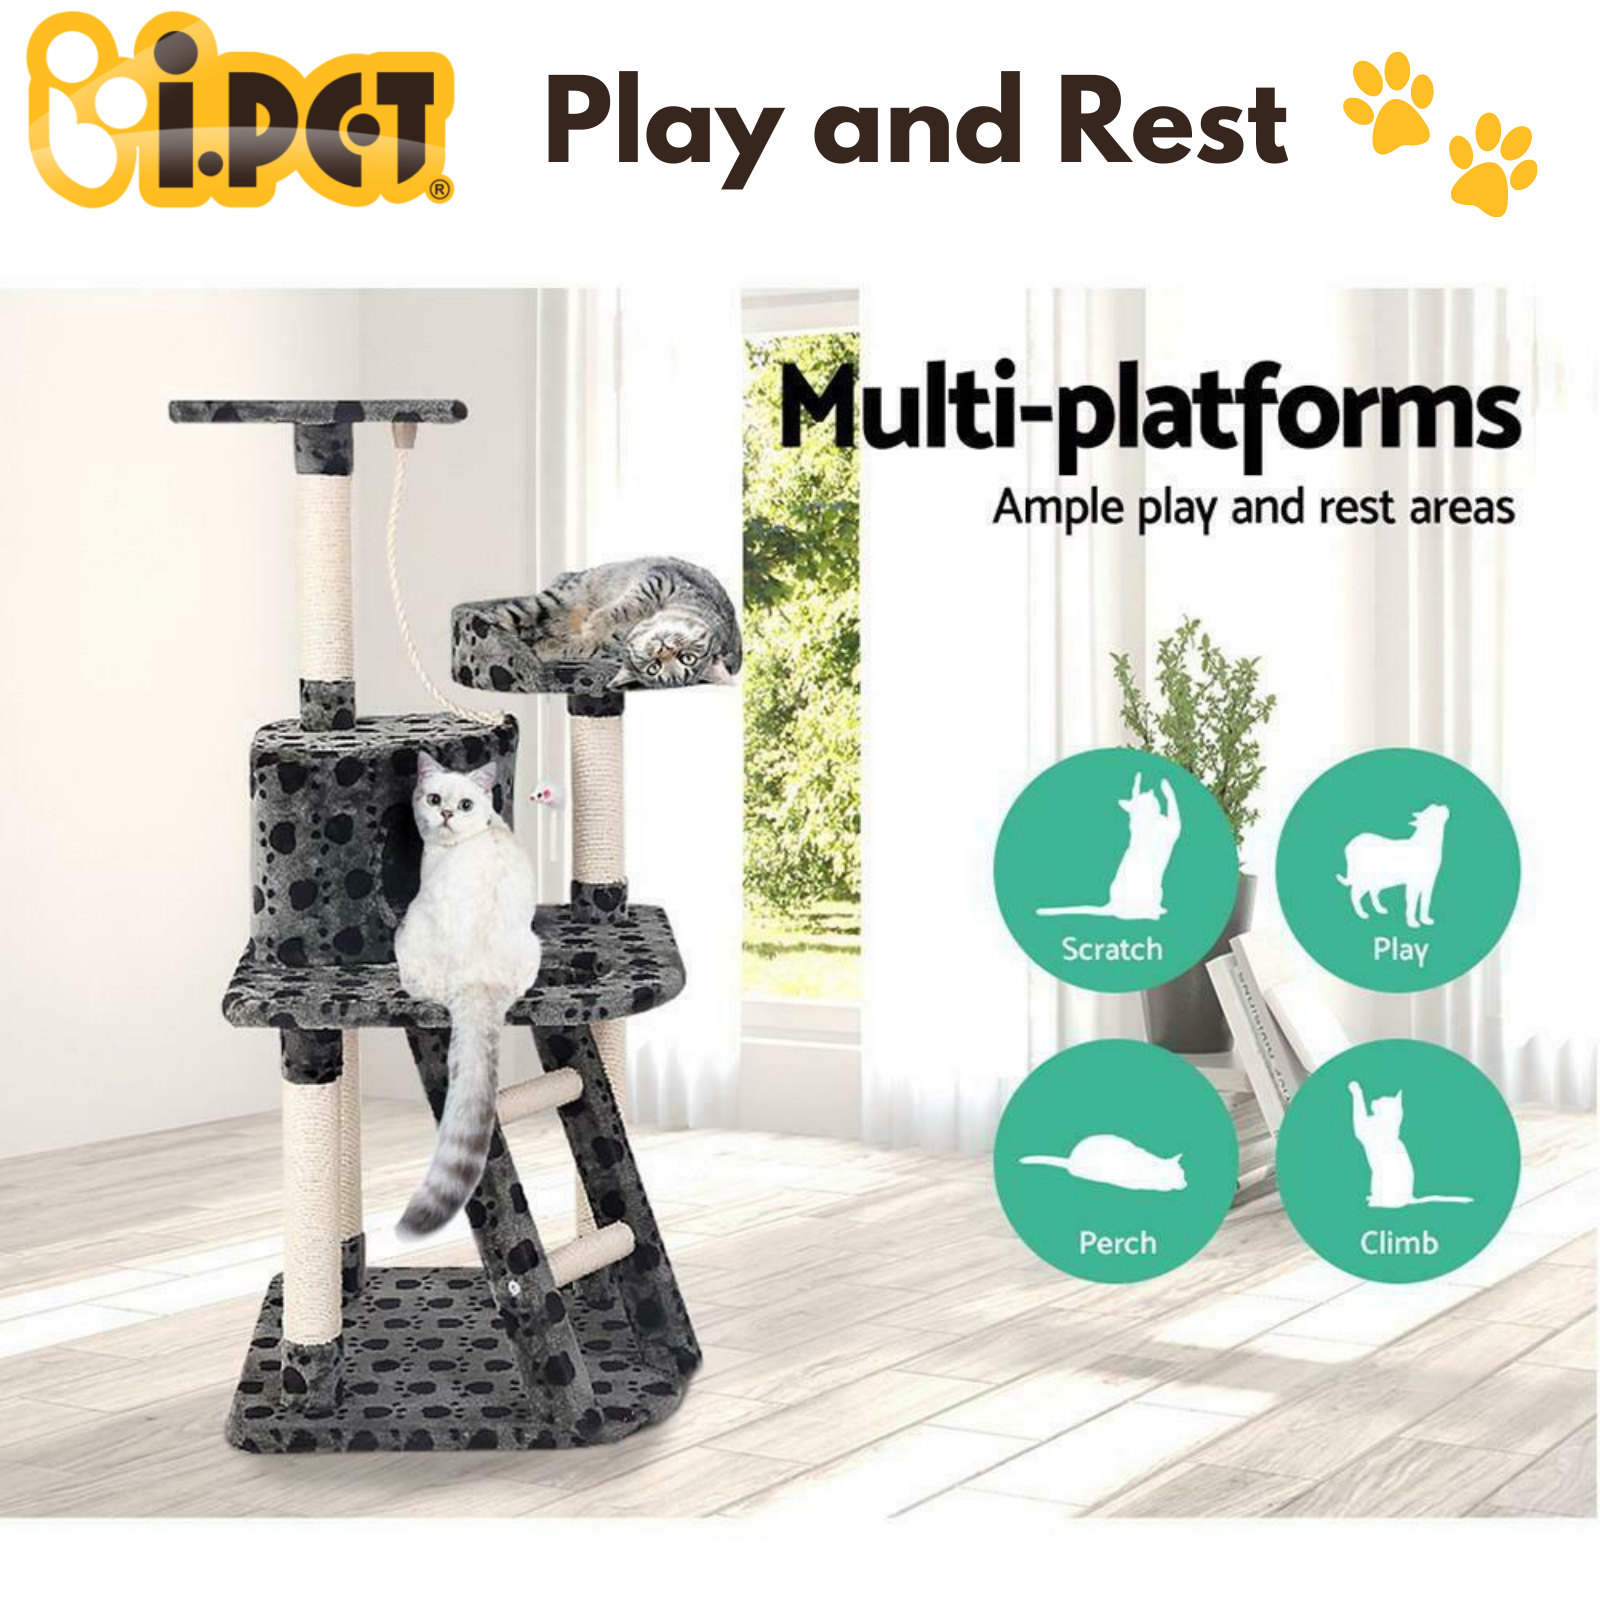 i.Pet Cat Scratching Post Tree has Multi-level design with ample play areas to climb, hide, play, search and scratch